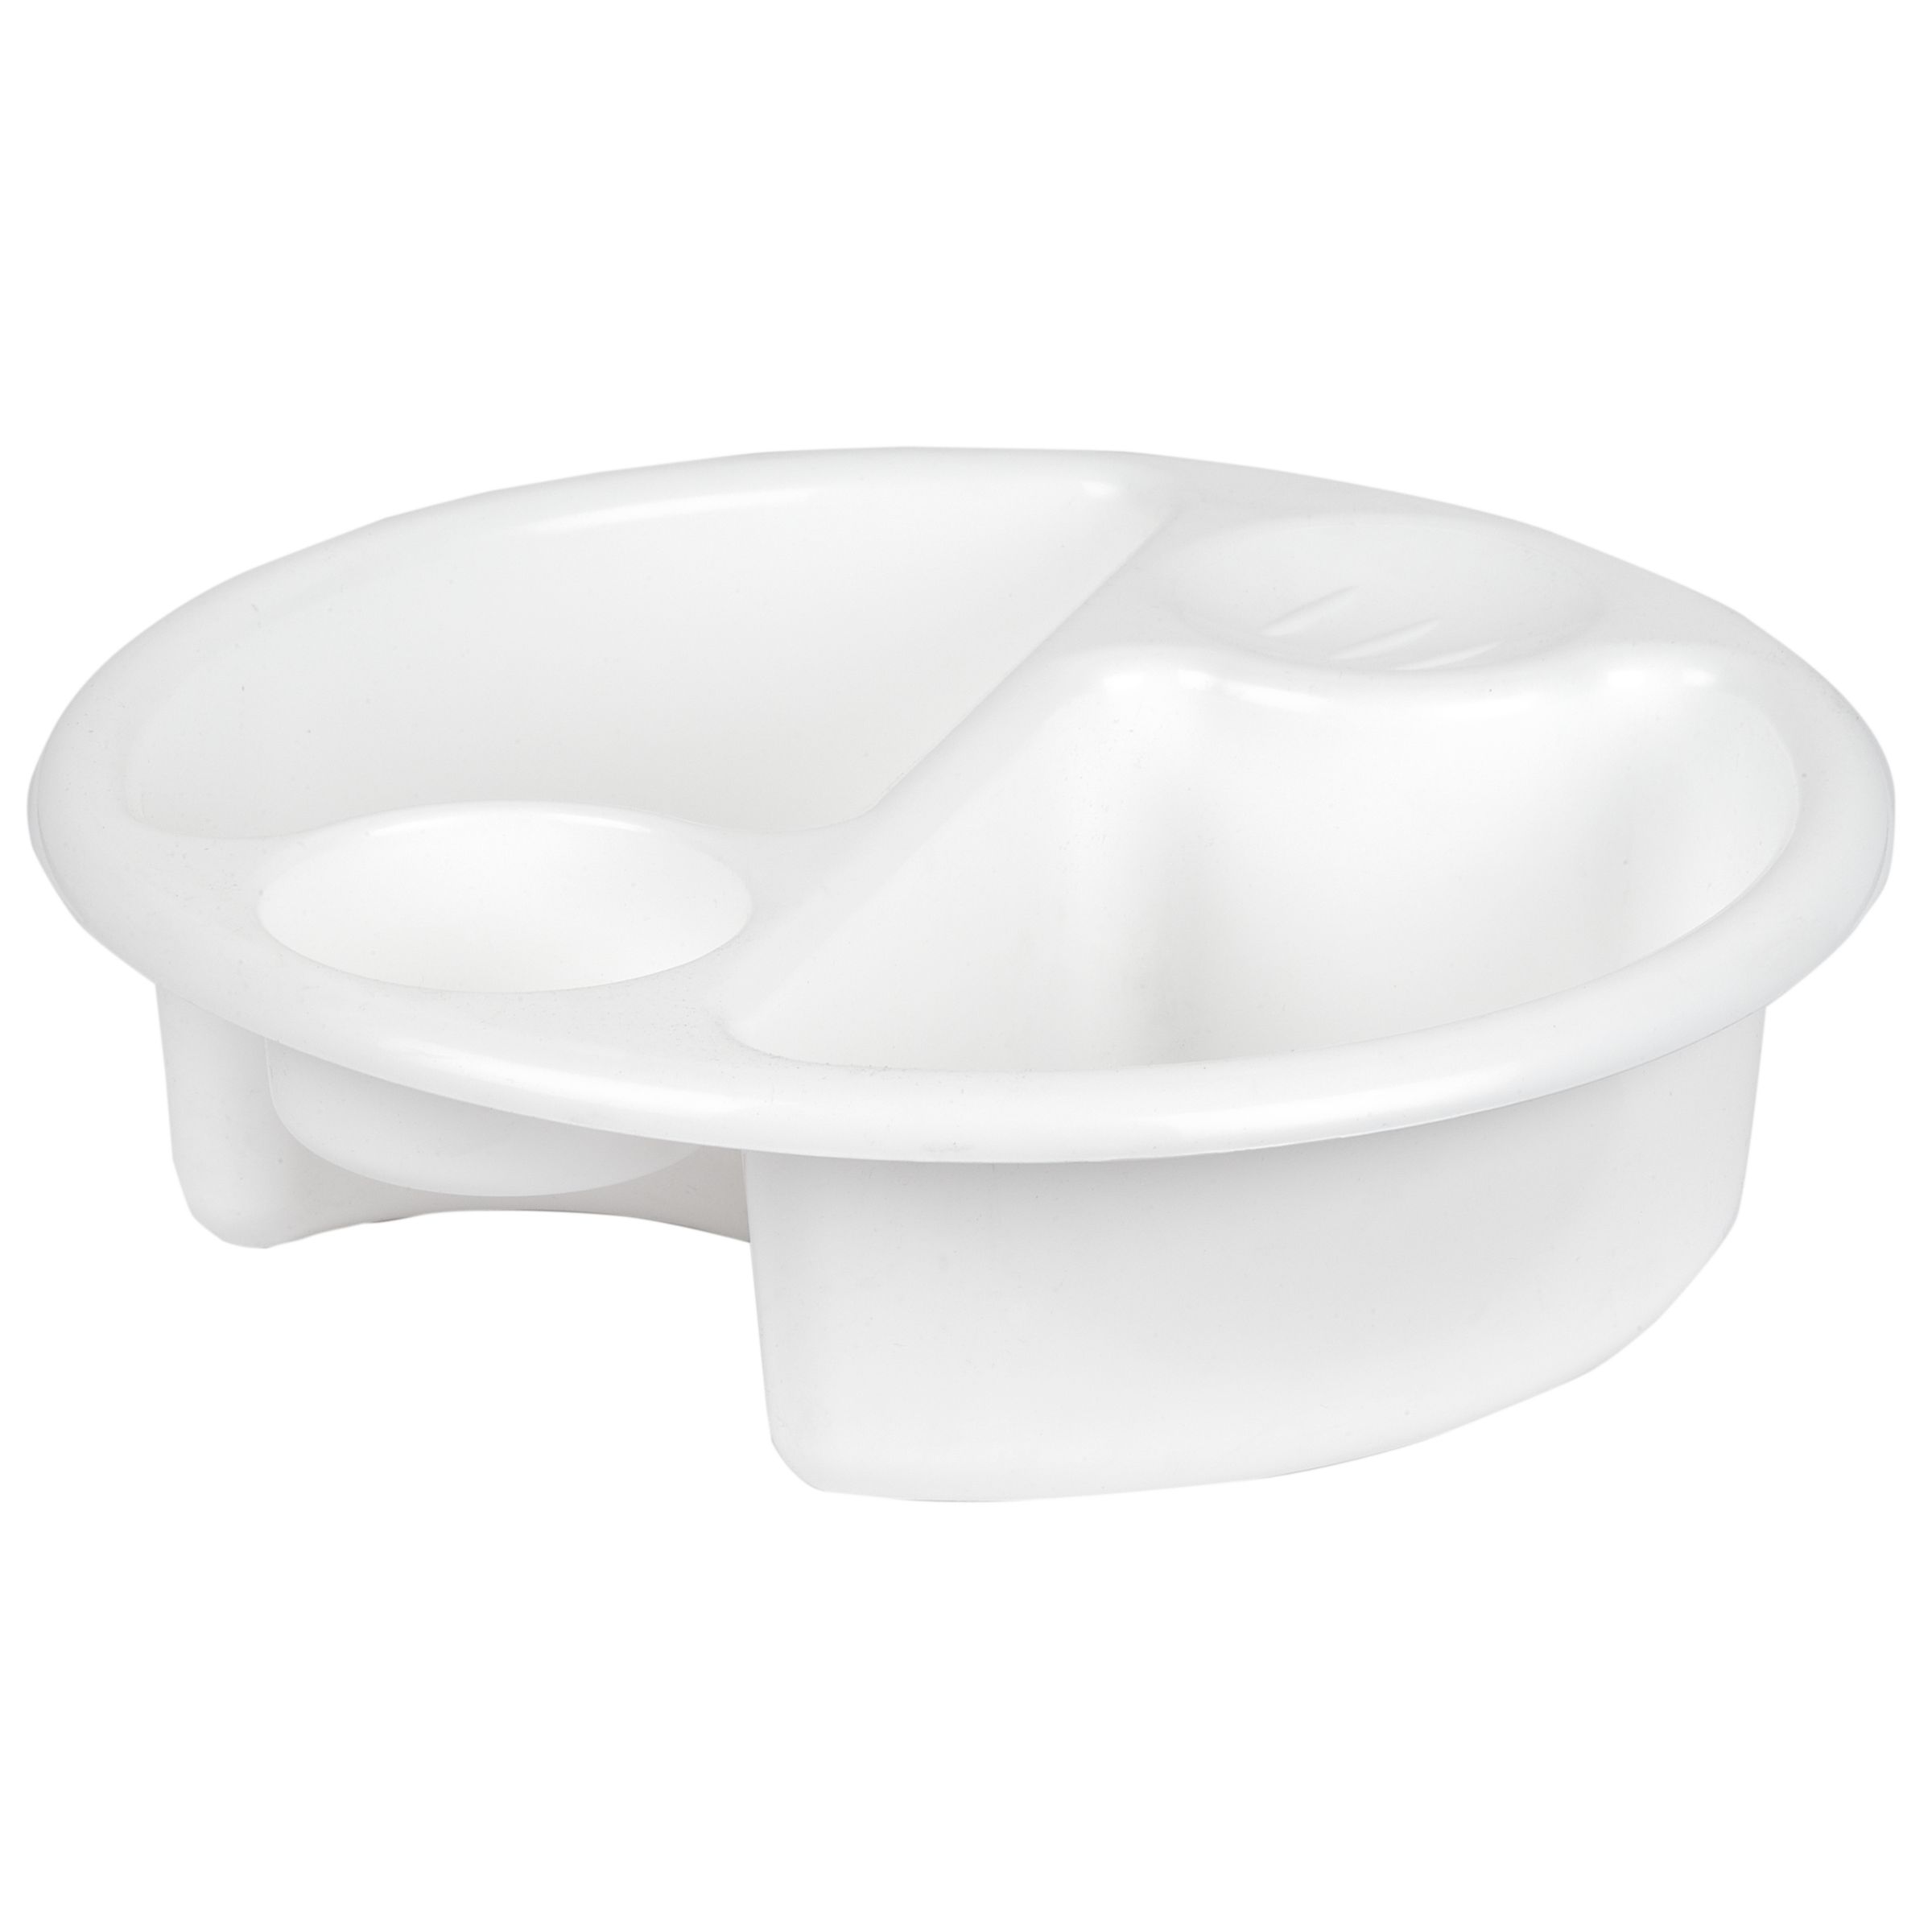 John Lewis Value Top and Tail Bowl, White